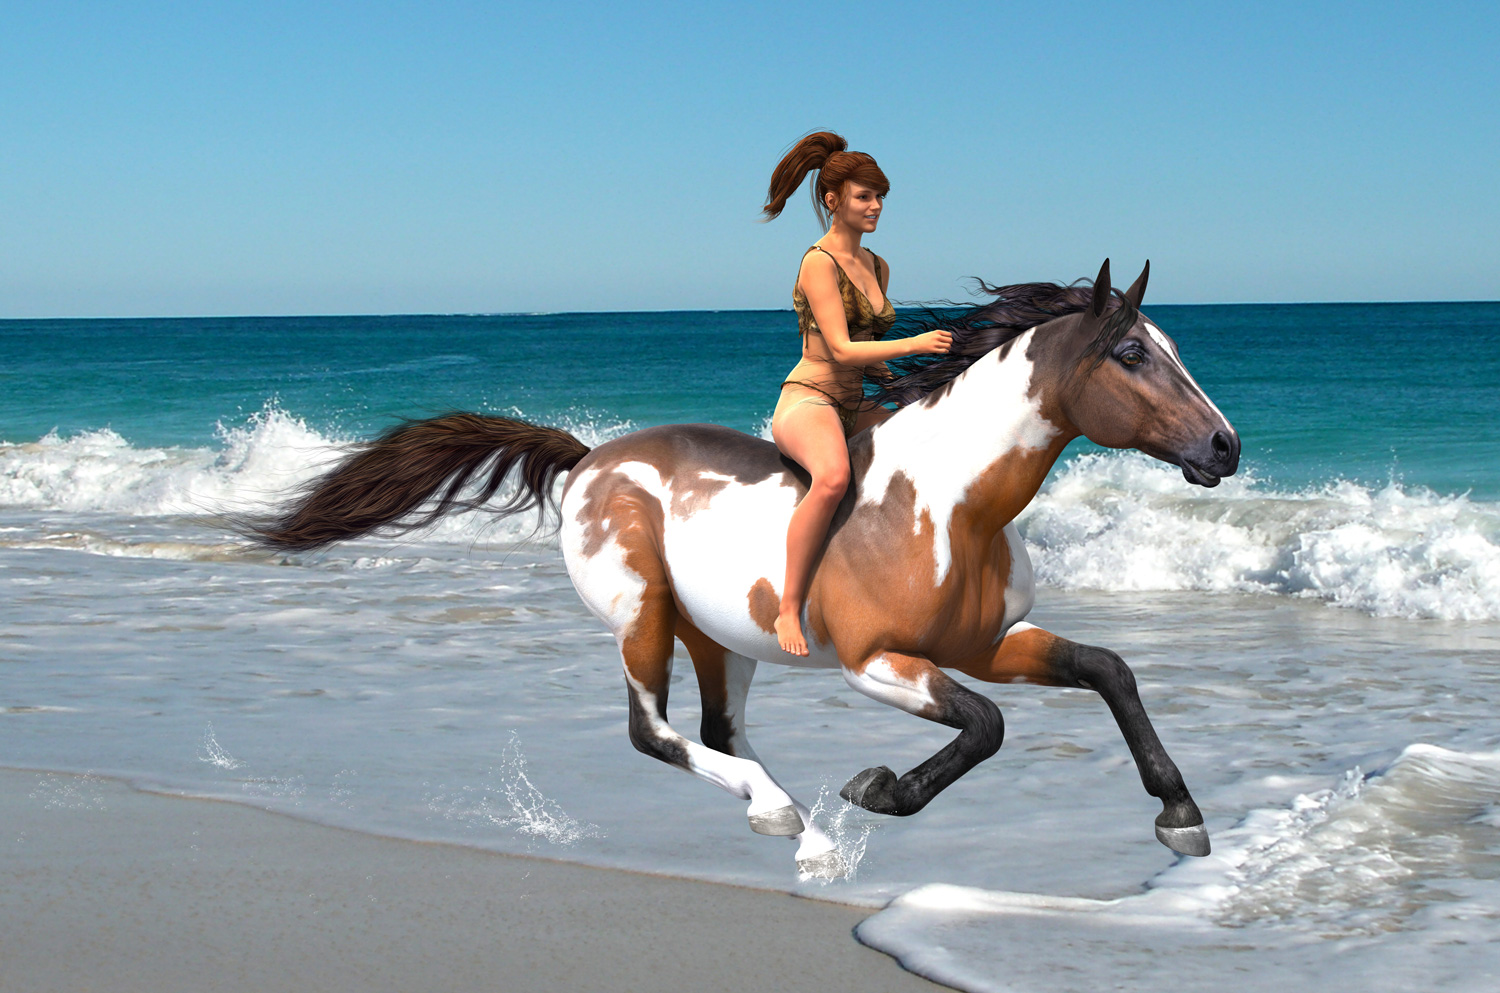 Galloping Through the Surf